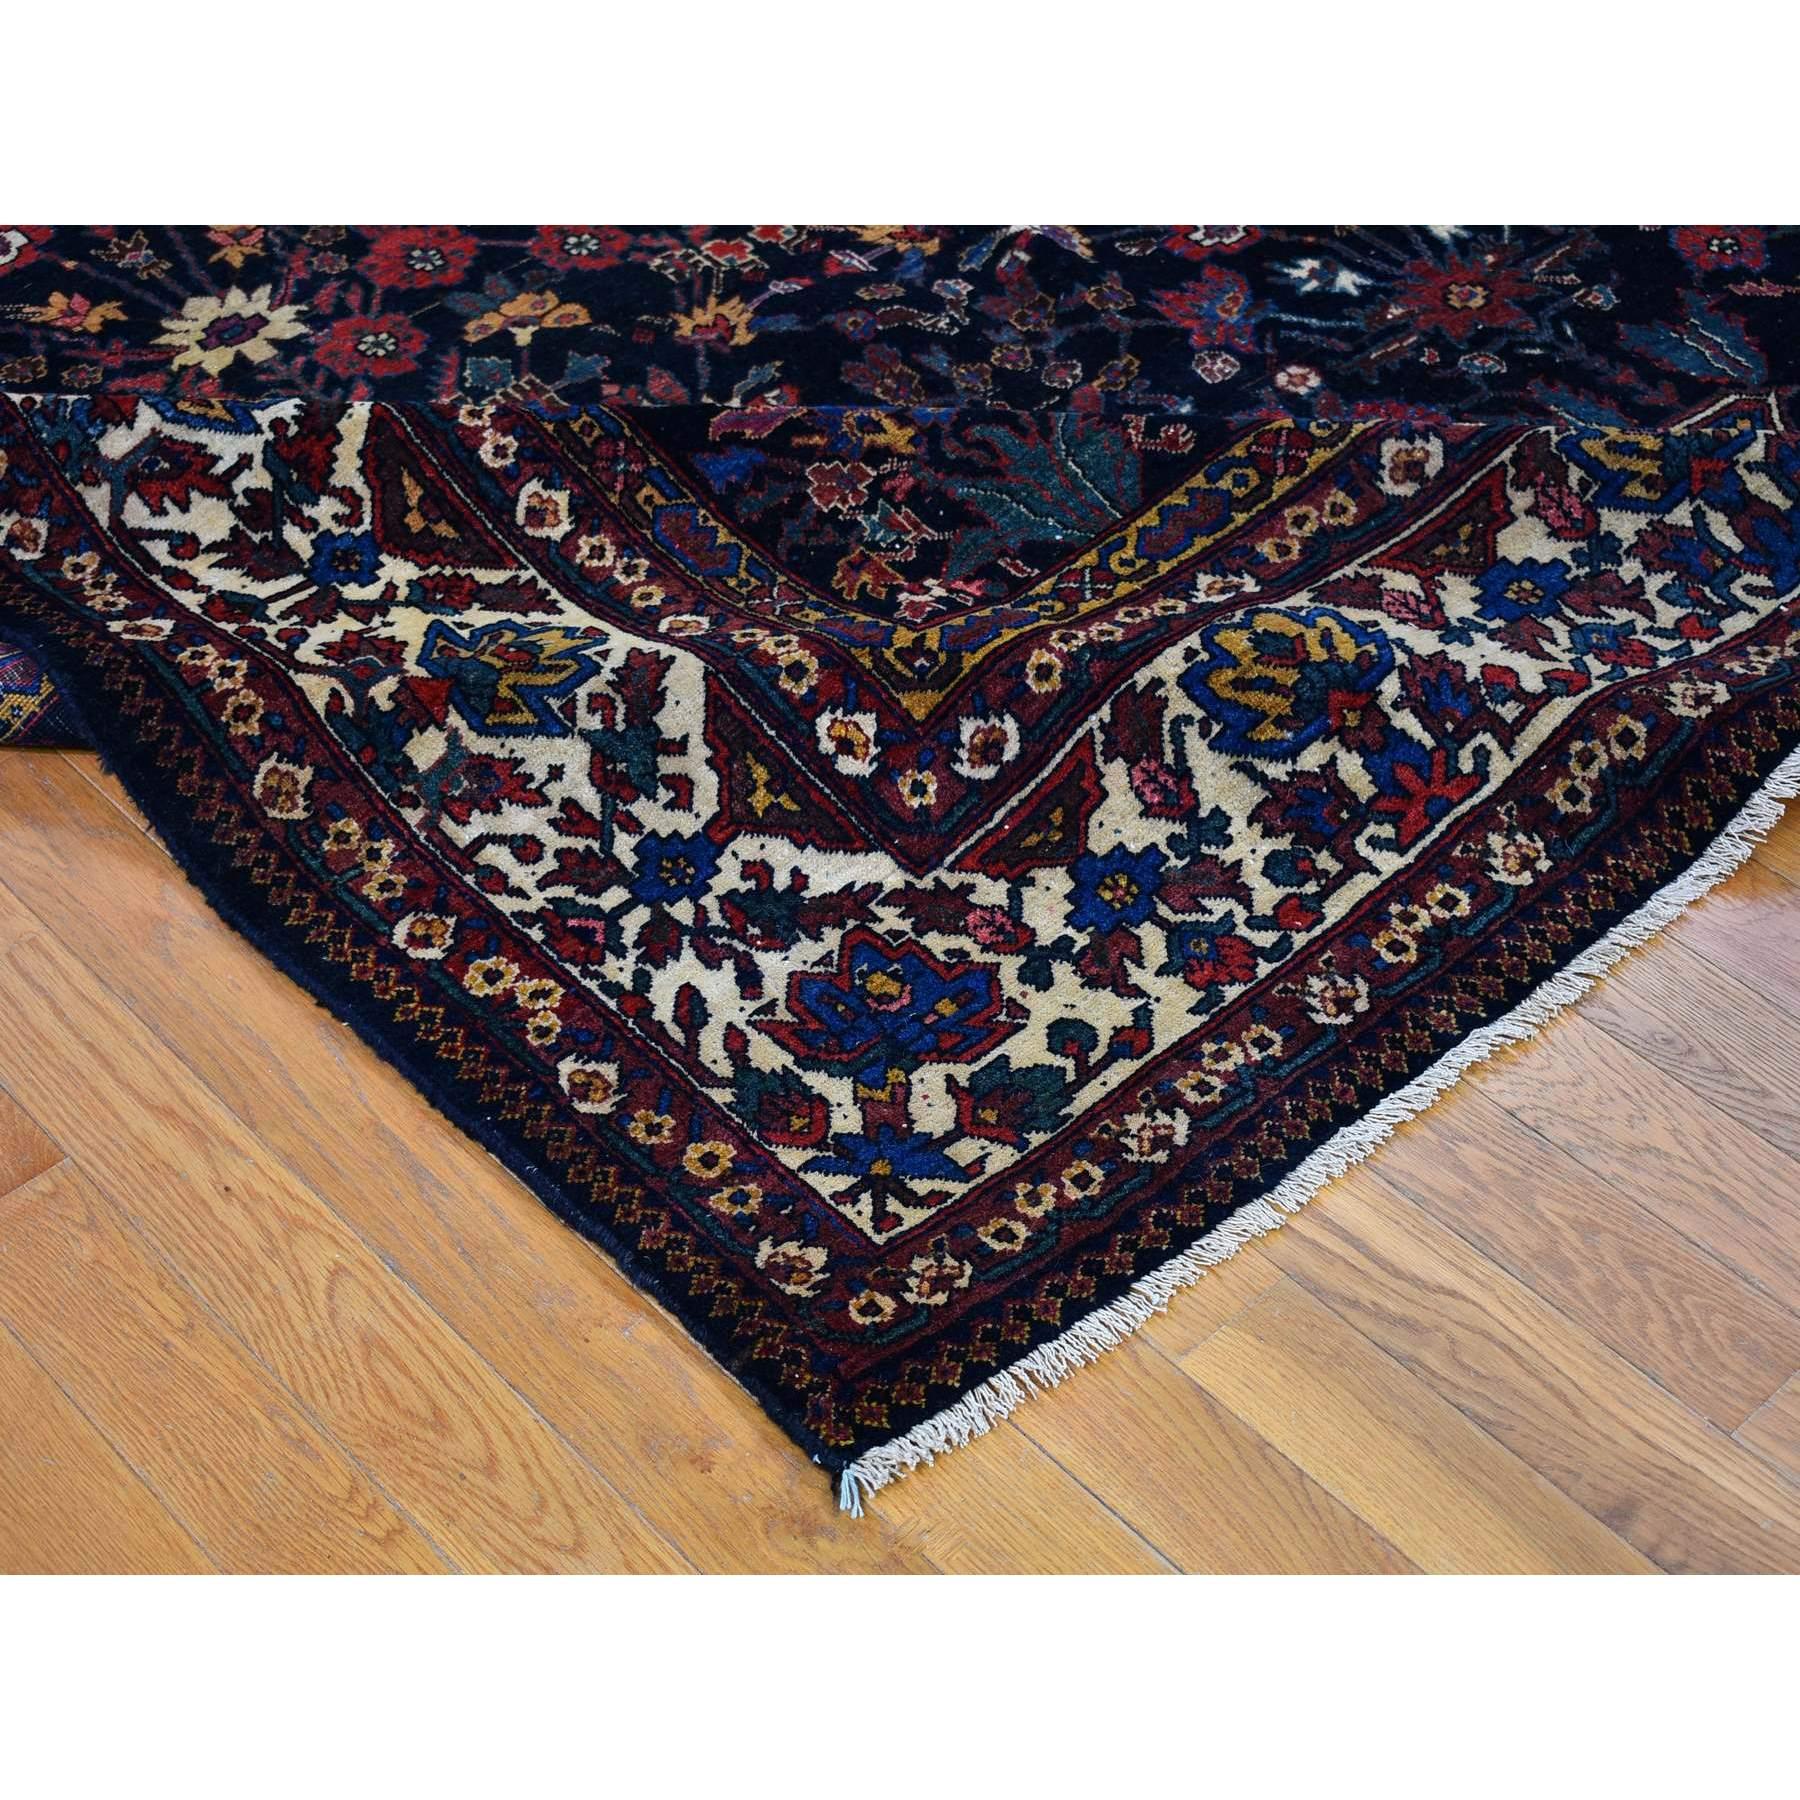 Early 20th Century Antique Persian Bakhtiar Good Condition Longer Shape Worn Down Hand Knotted Rug For Sale